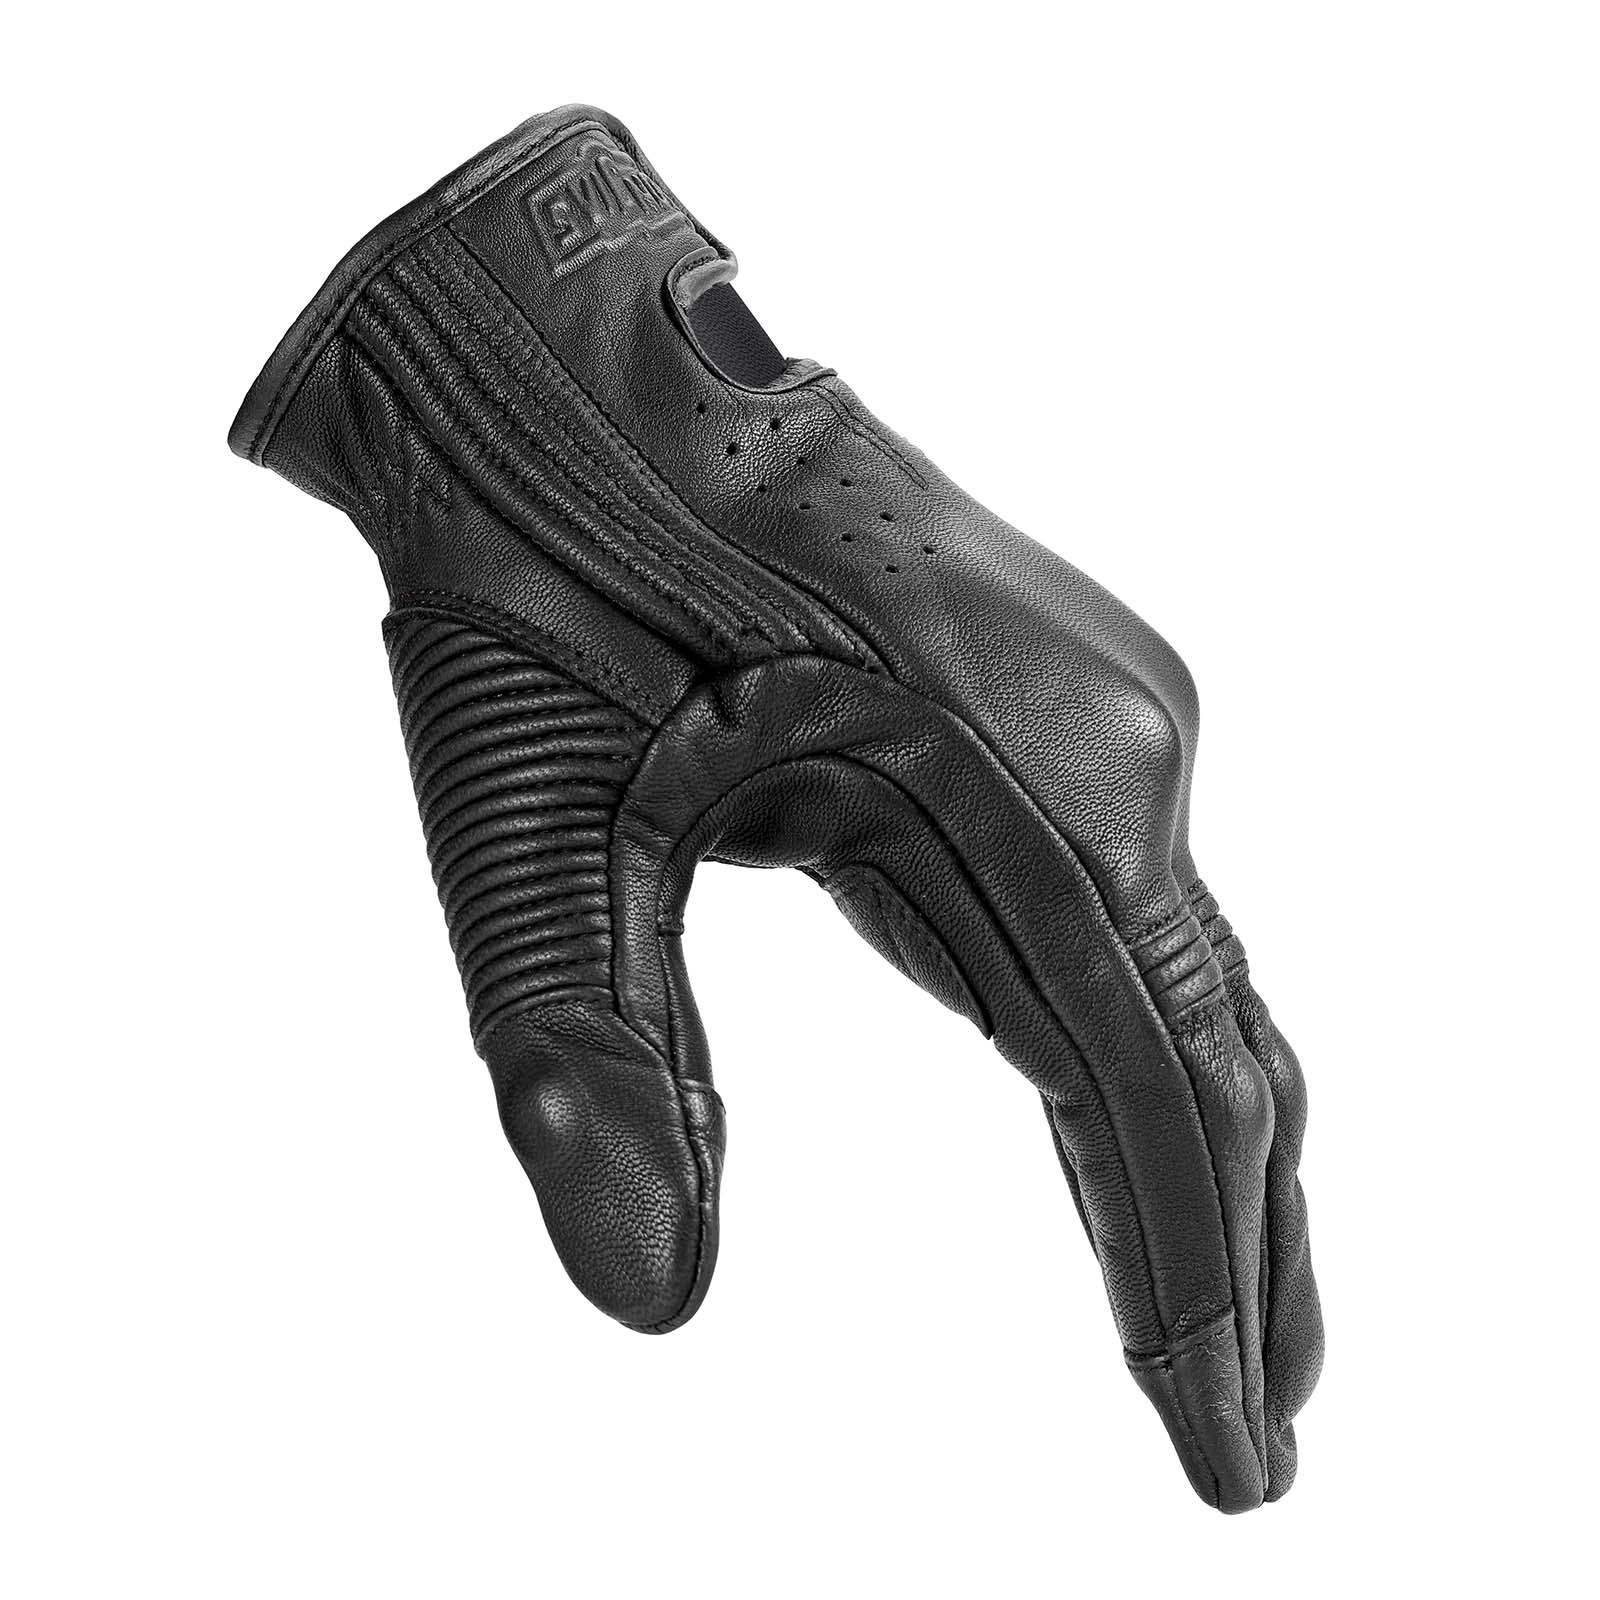 ‎Vintage Leather Motorcycle Gloves | JIA14